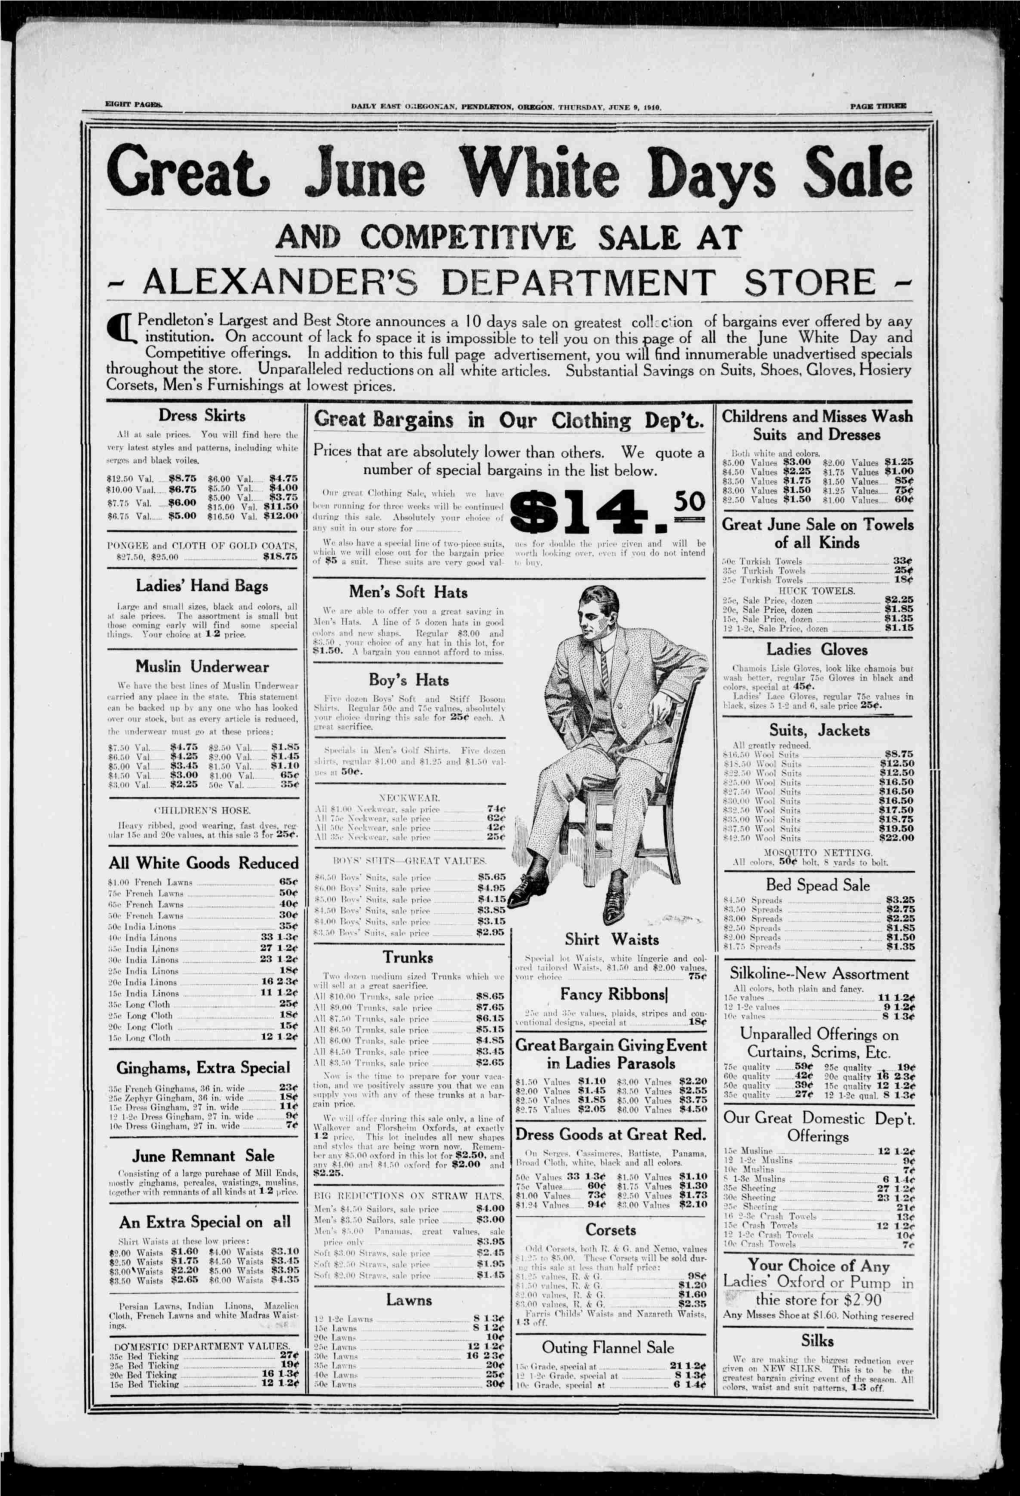 ALEXANDER's DEPARTMENT STORE - TT Pendleton's Largest and Best Store Announces a 10 Days Sale on Greatest Collection of Bargains Ever Offered by Any Ml Institution